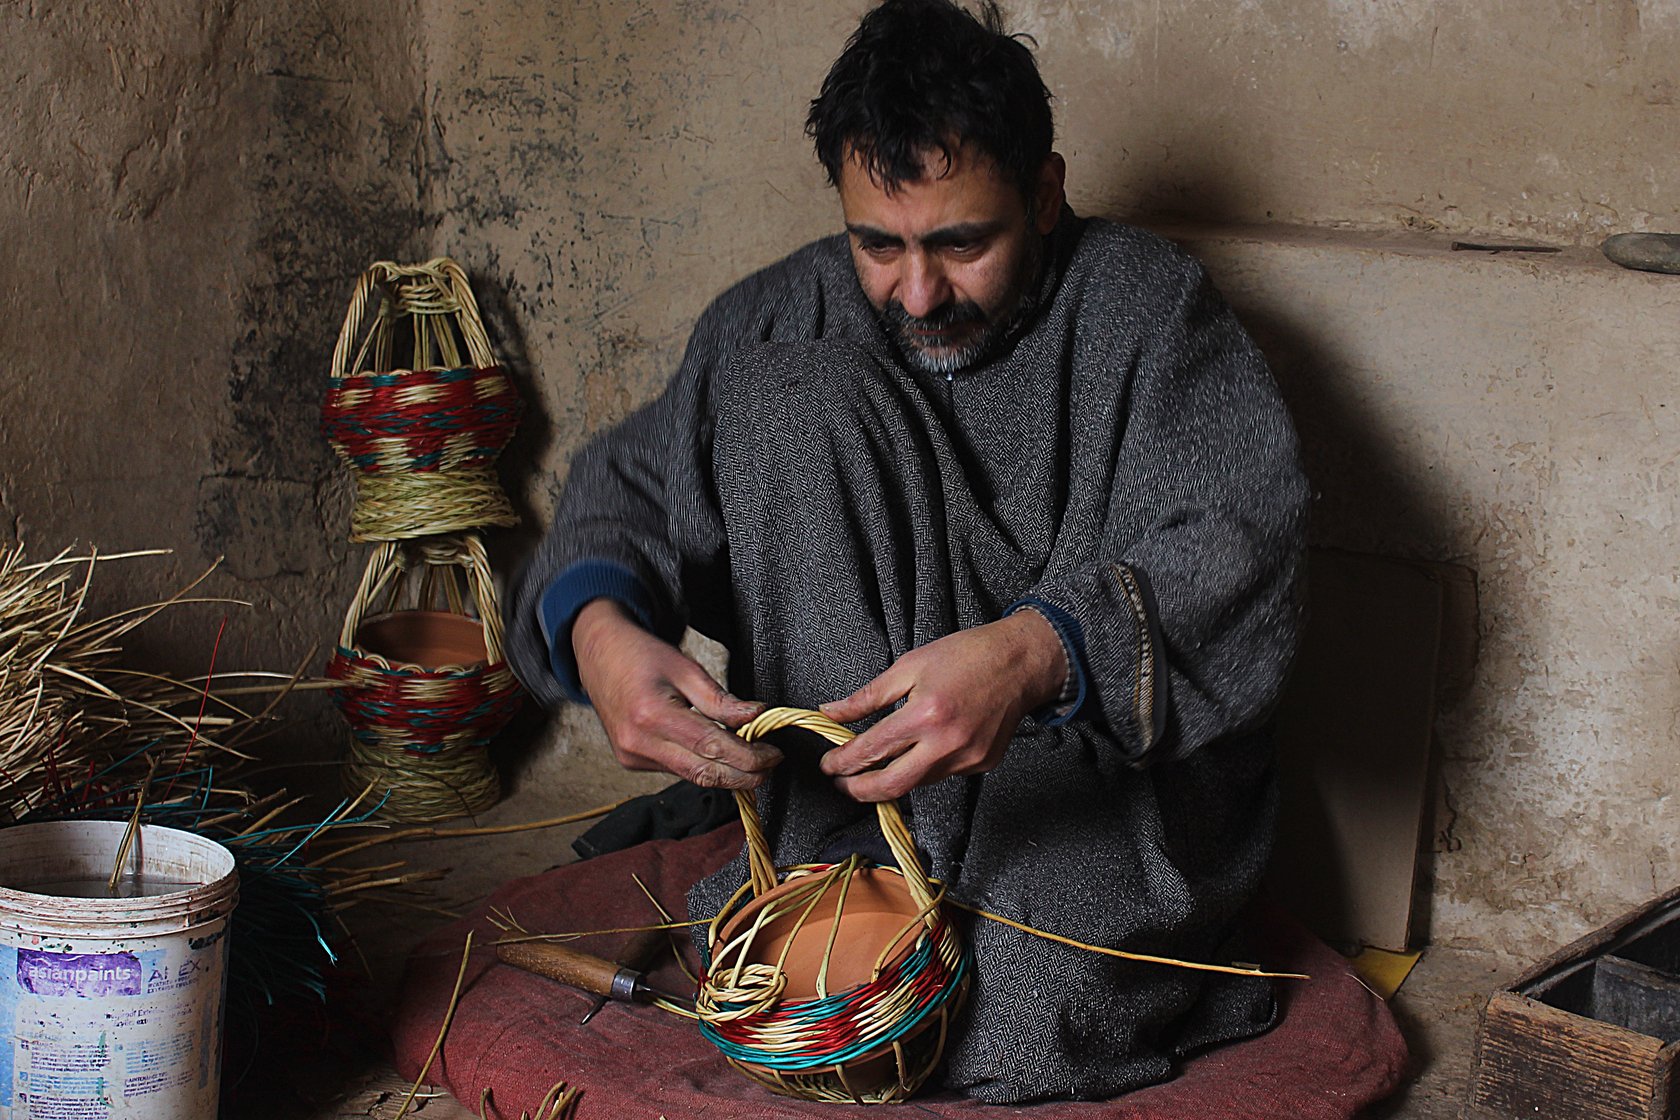 Manzoor Ahmad, 40, a resident of Kanil mohalla in Charar-i-Sharief, has been weaving kangris for 25 years. “I can weave up to 3-4 basic kangris in a day and it takes me 3-4 days to make a high quality kangri,” he says